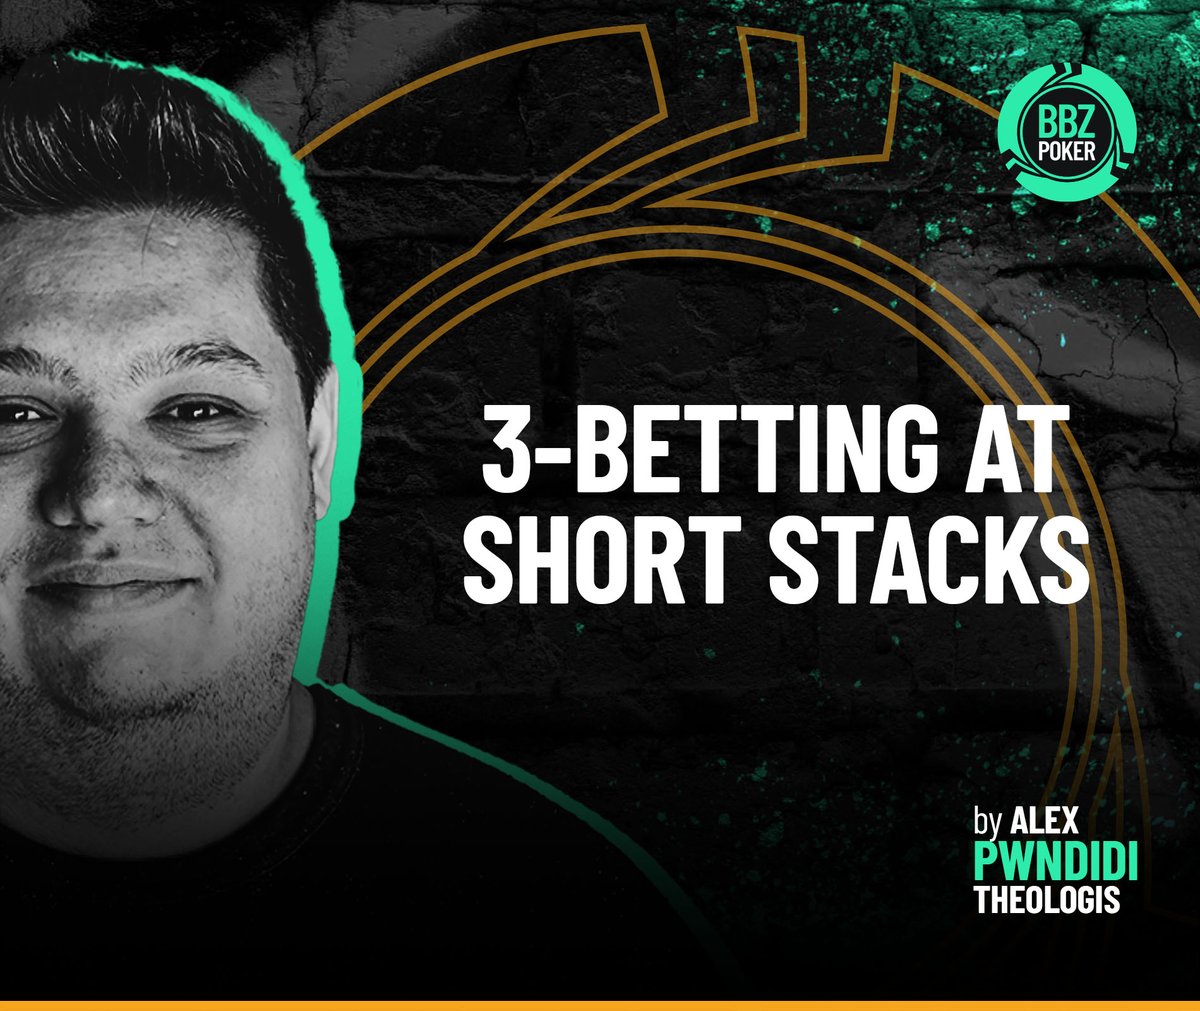 🚀We are excited to launch our brand-new 3-Betting Course with Alex 'pwndidi' Theologis! 📈Master the art of 3-betting with a shorter stack and capture the chips most players are missing!